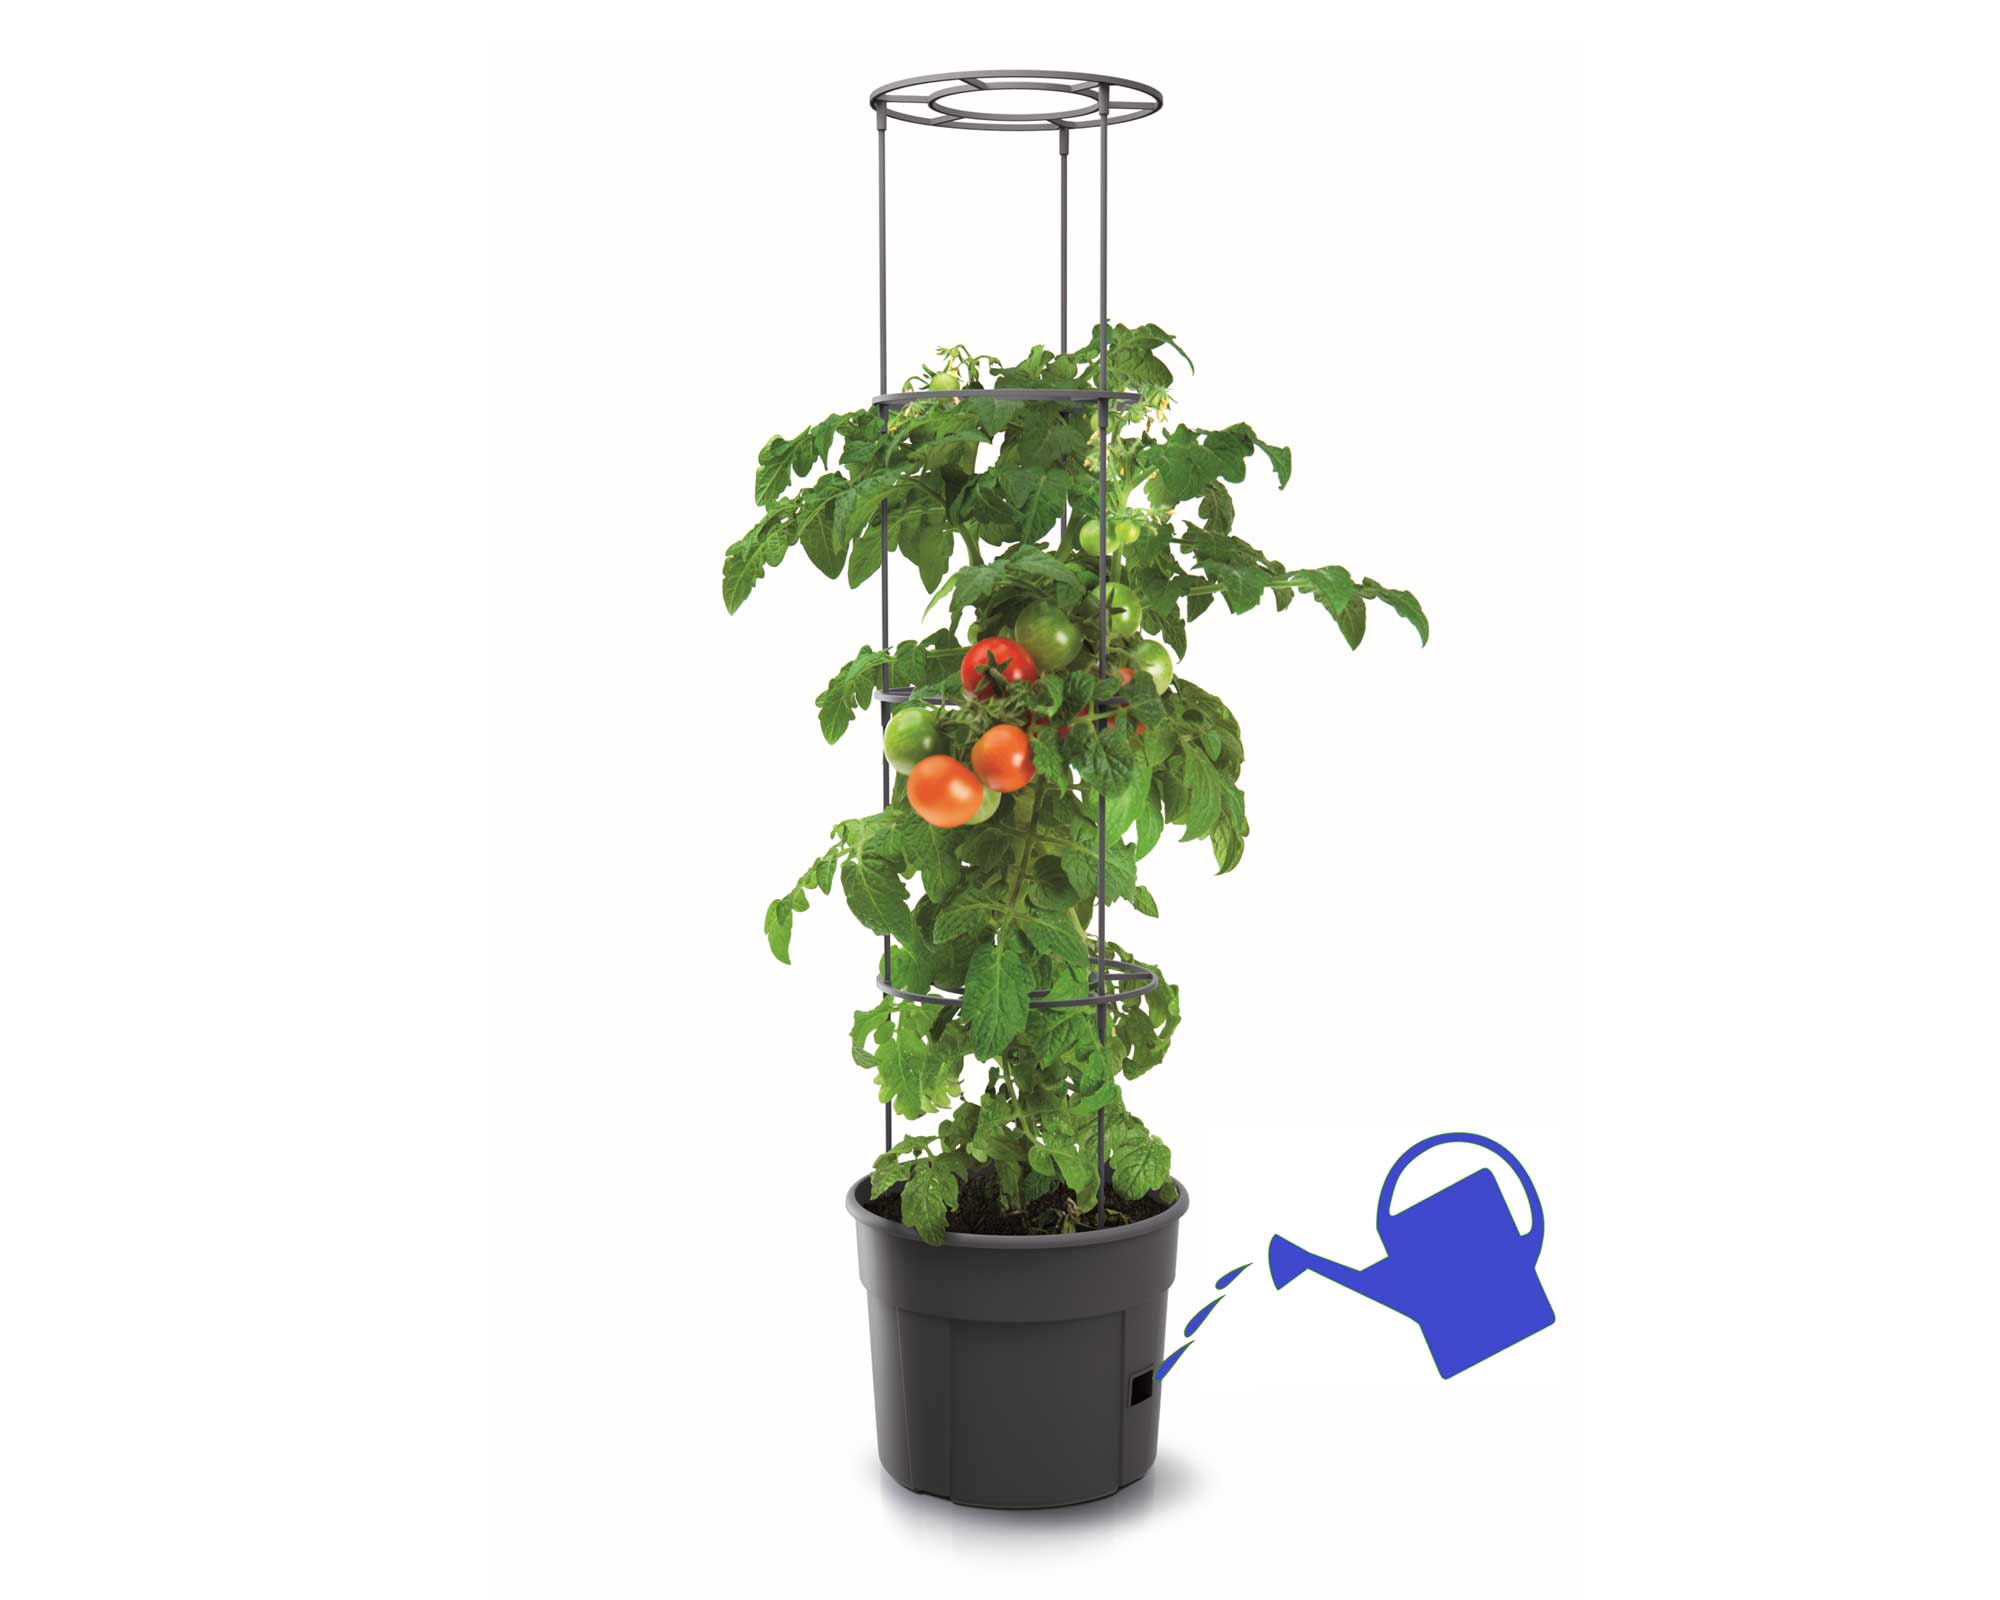 Tomato Grower Stand - Where to Water Roots